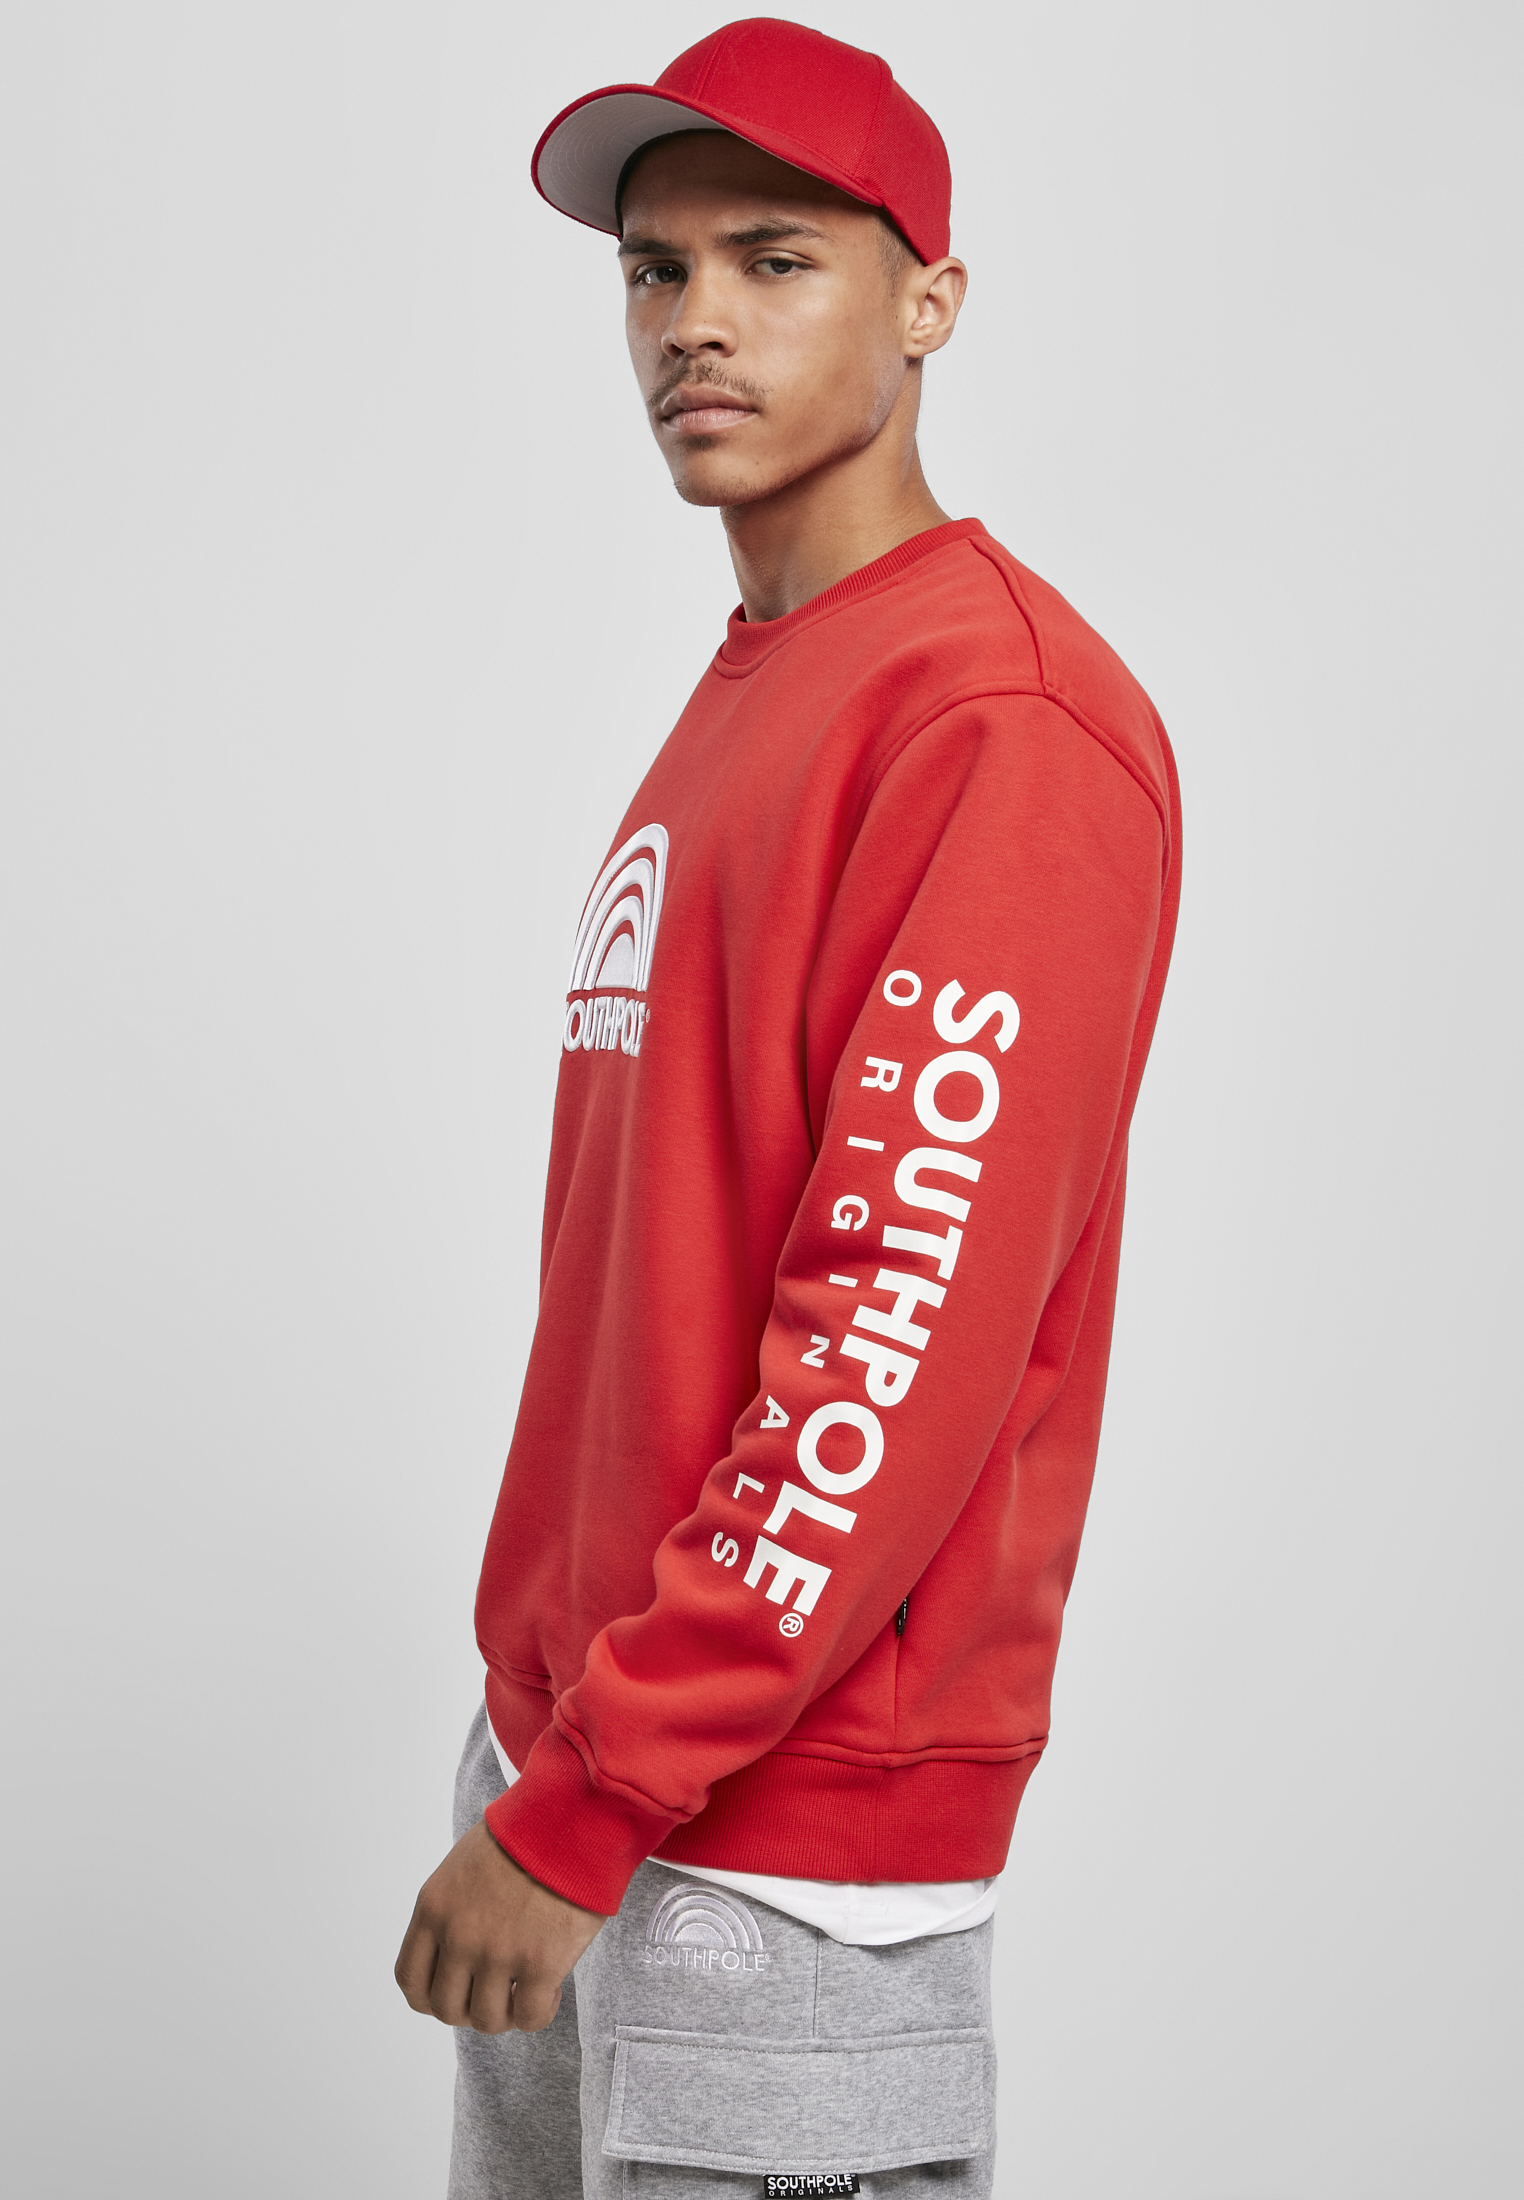 Saisonware Southpole 3D Crewneck in Farbe SP red